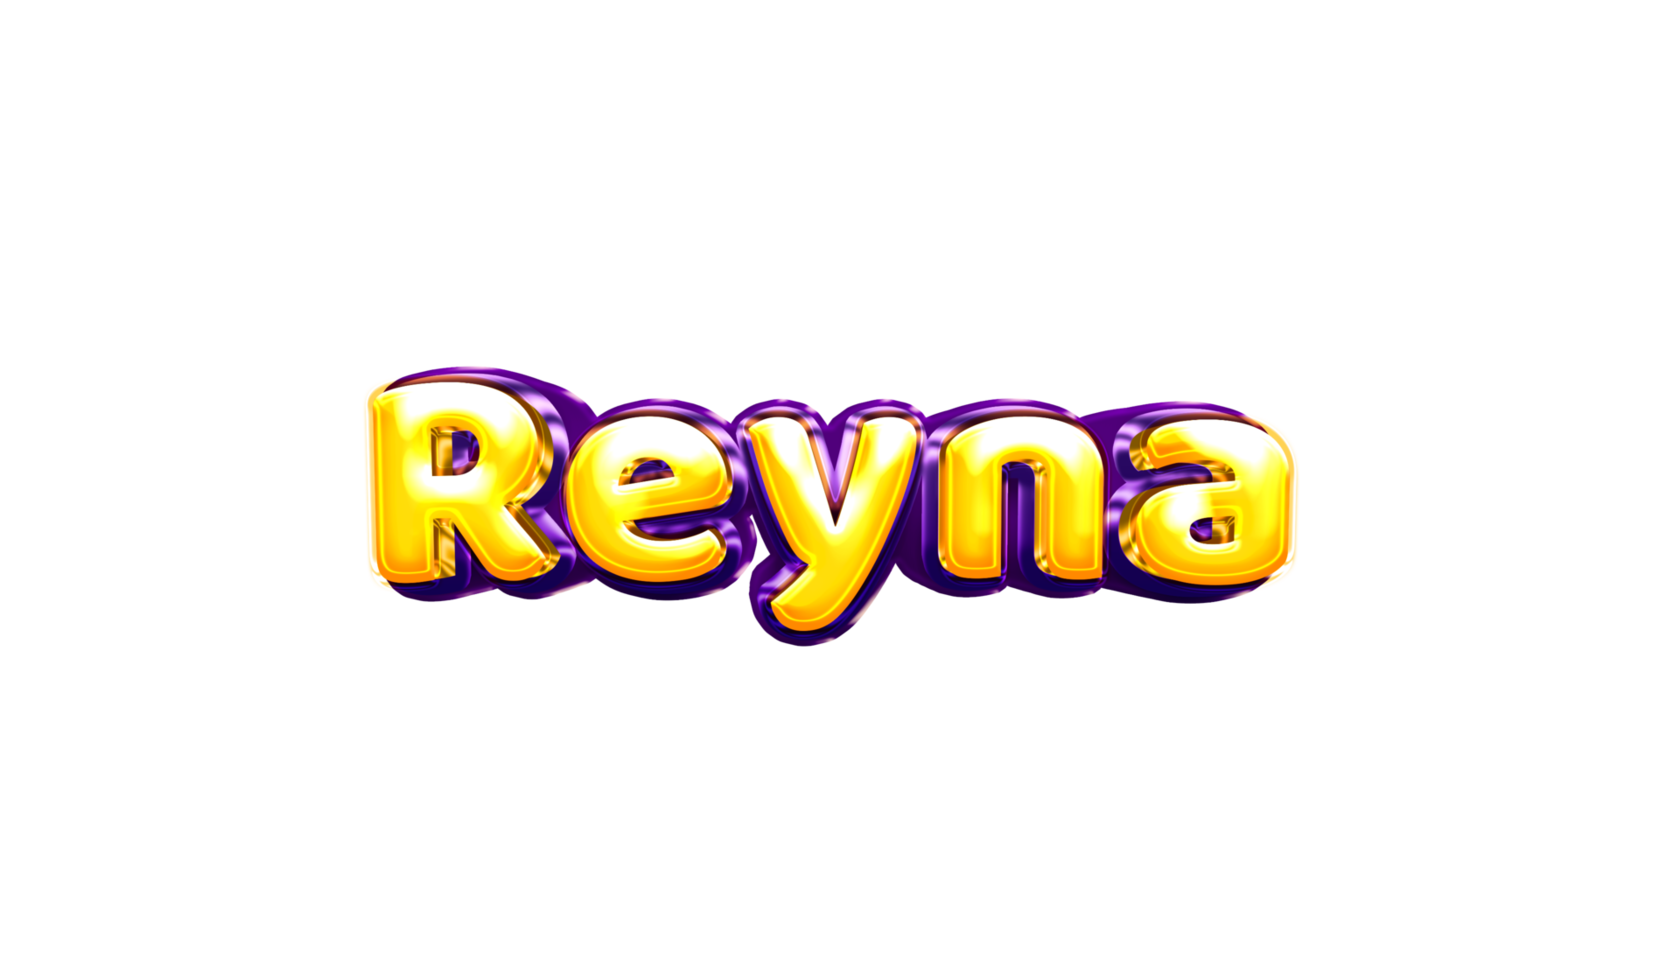 girls name sticker colorful party balloon birthday helium air shiny yellow purple cutout Reyna png